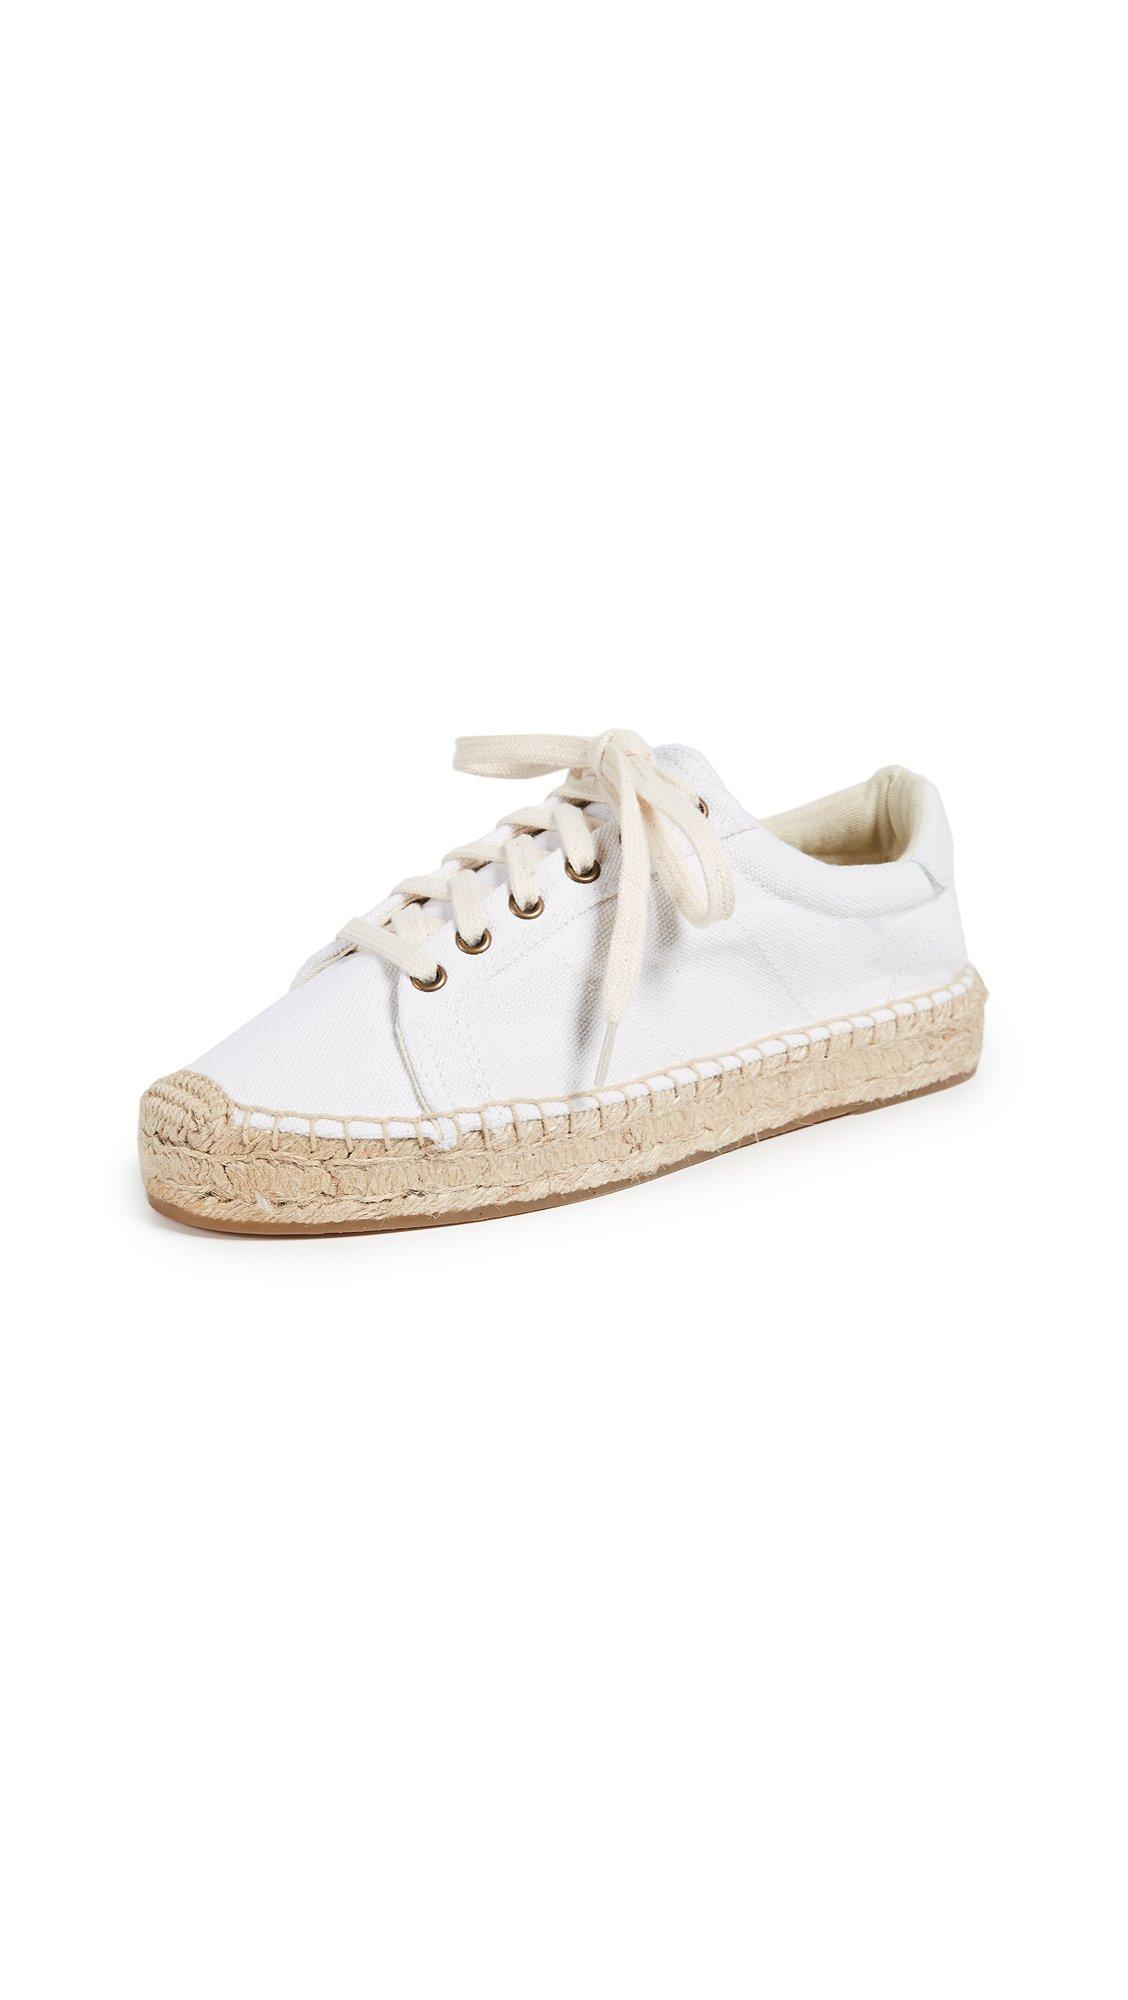 Soludos Canvas Espadrille Sneakers in Bright White (White) - Save 61% ...